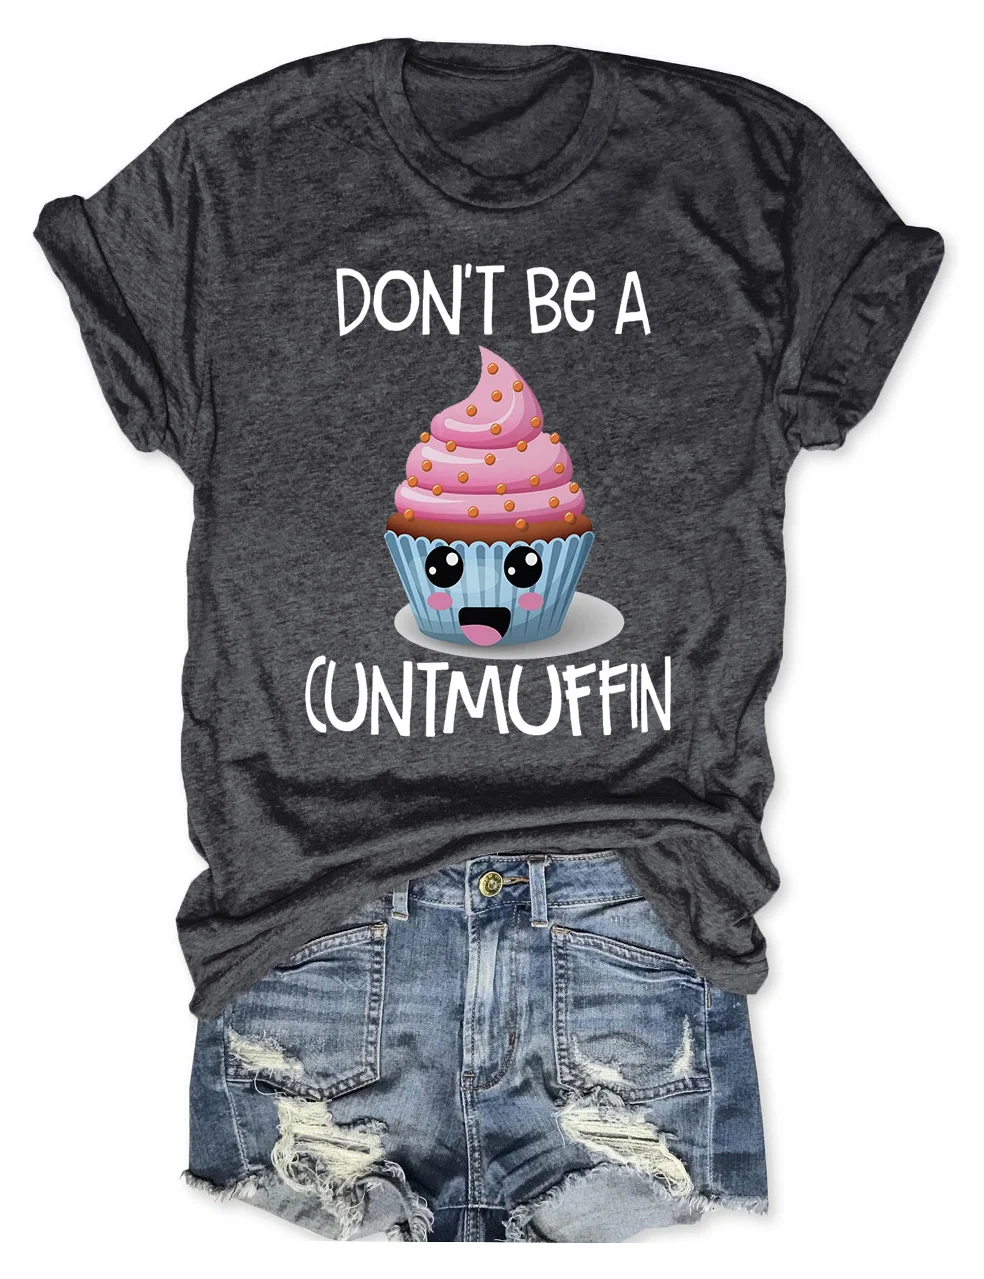 Don't Be A Cuntmuffin/Twatwaffle Funny T-Shirt